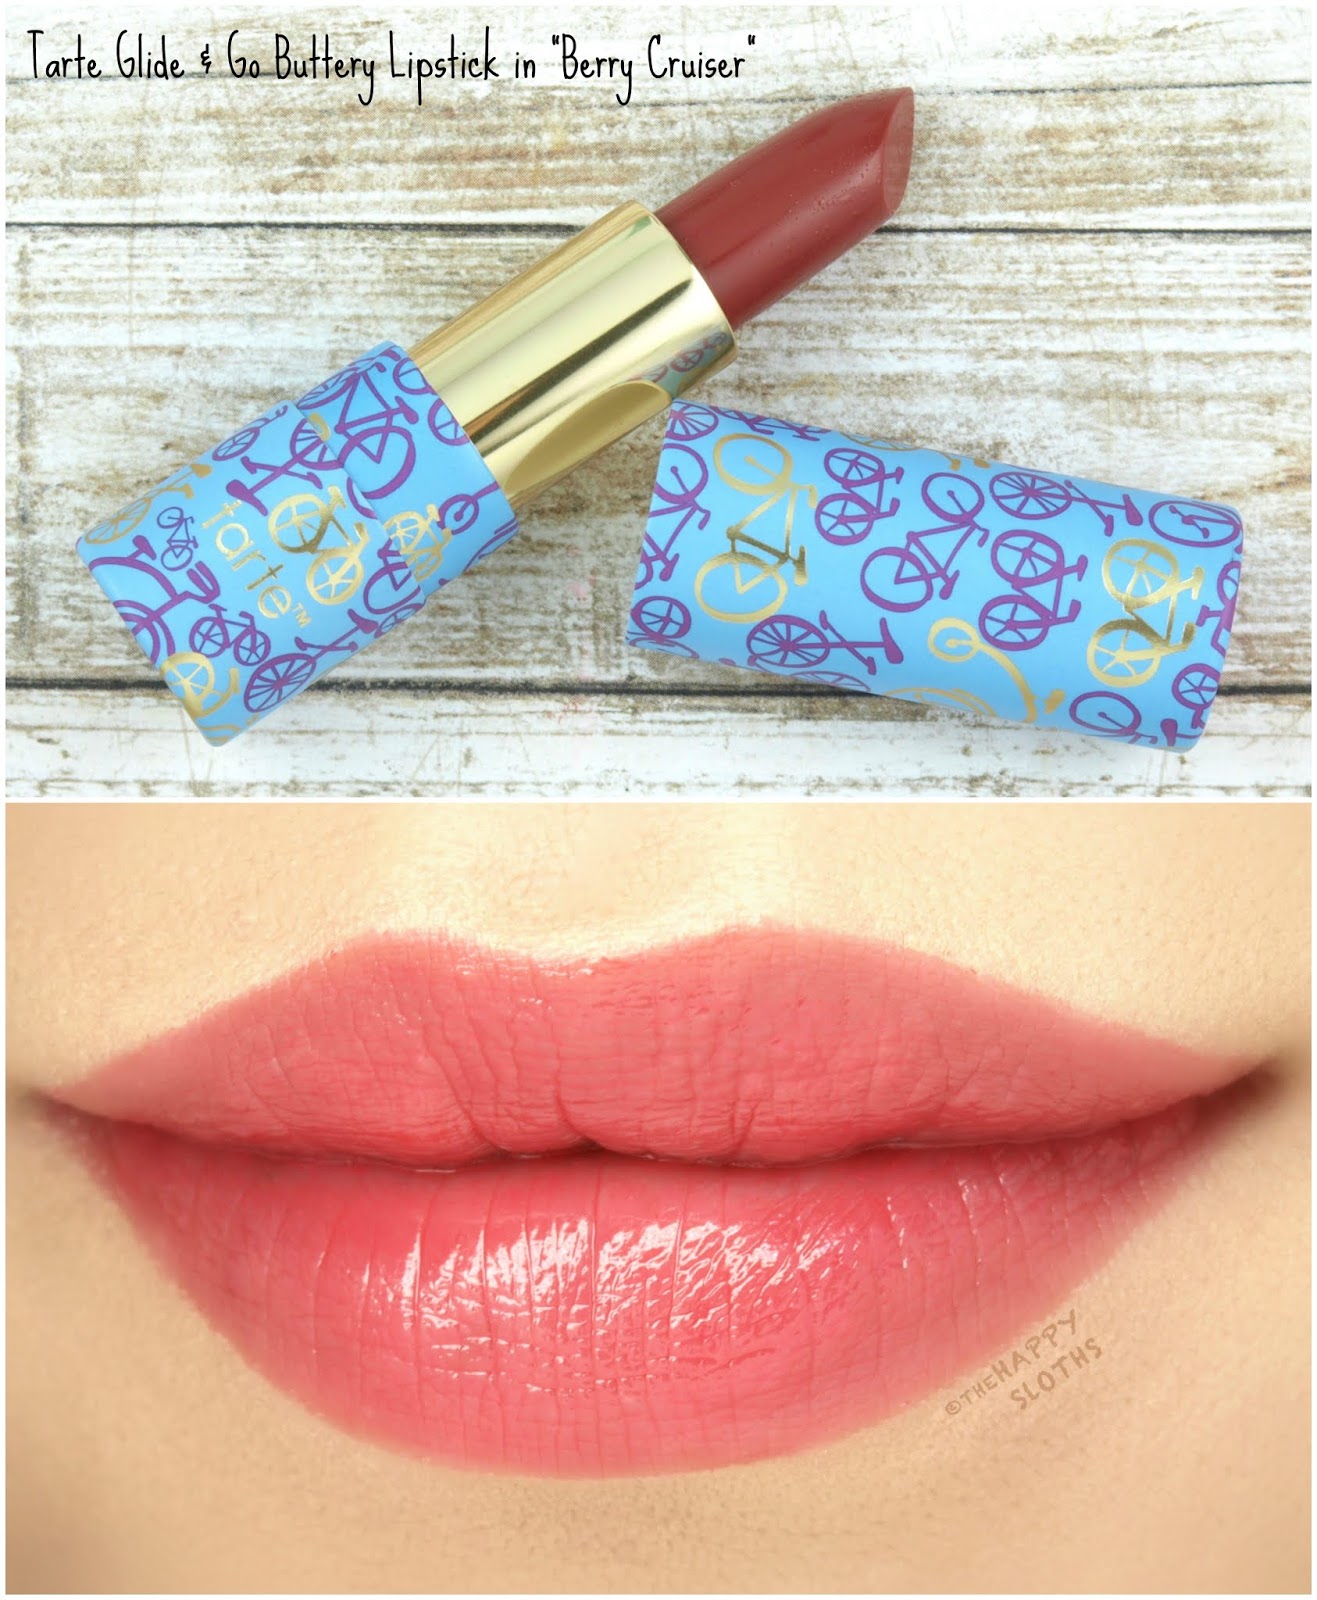 Tarte | Double Duty Beauty Glide & Go Buttery Lipstick in "Berry Cruiser": Review and Swatches